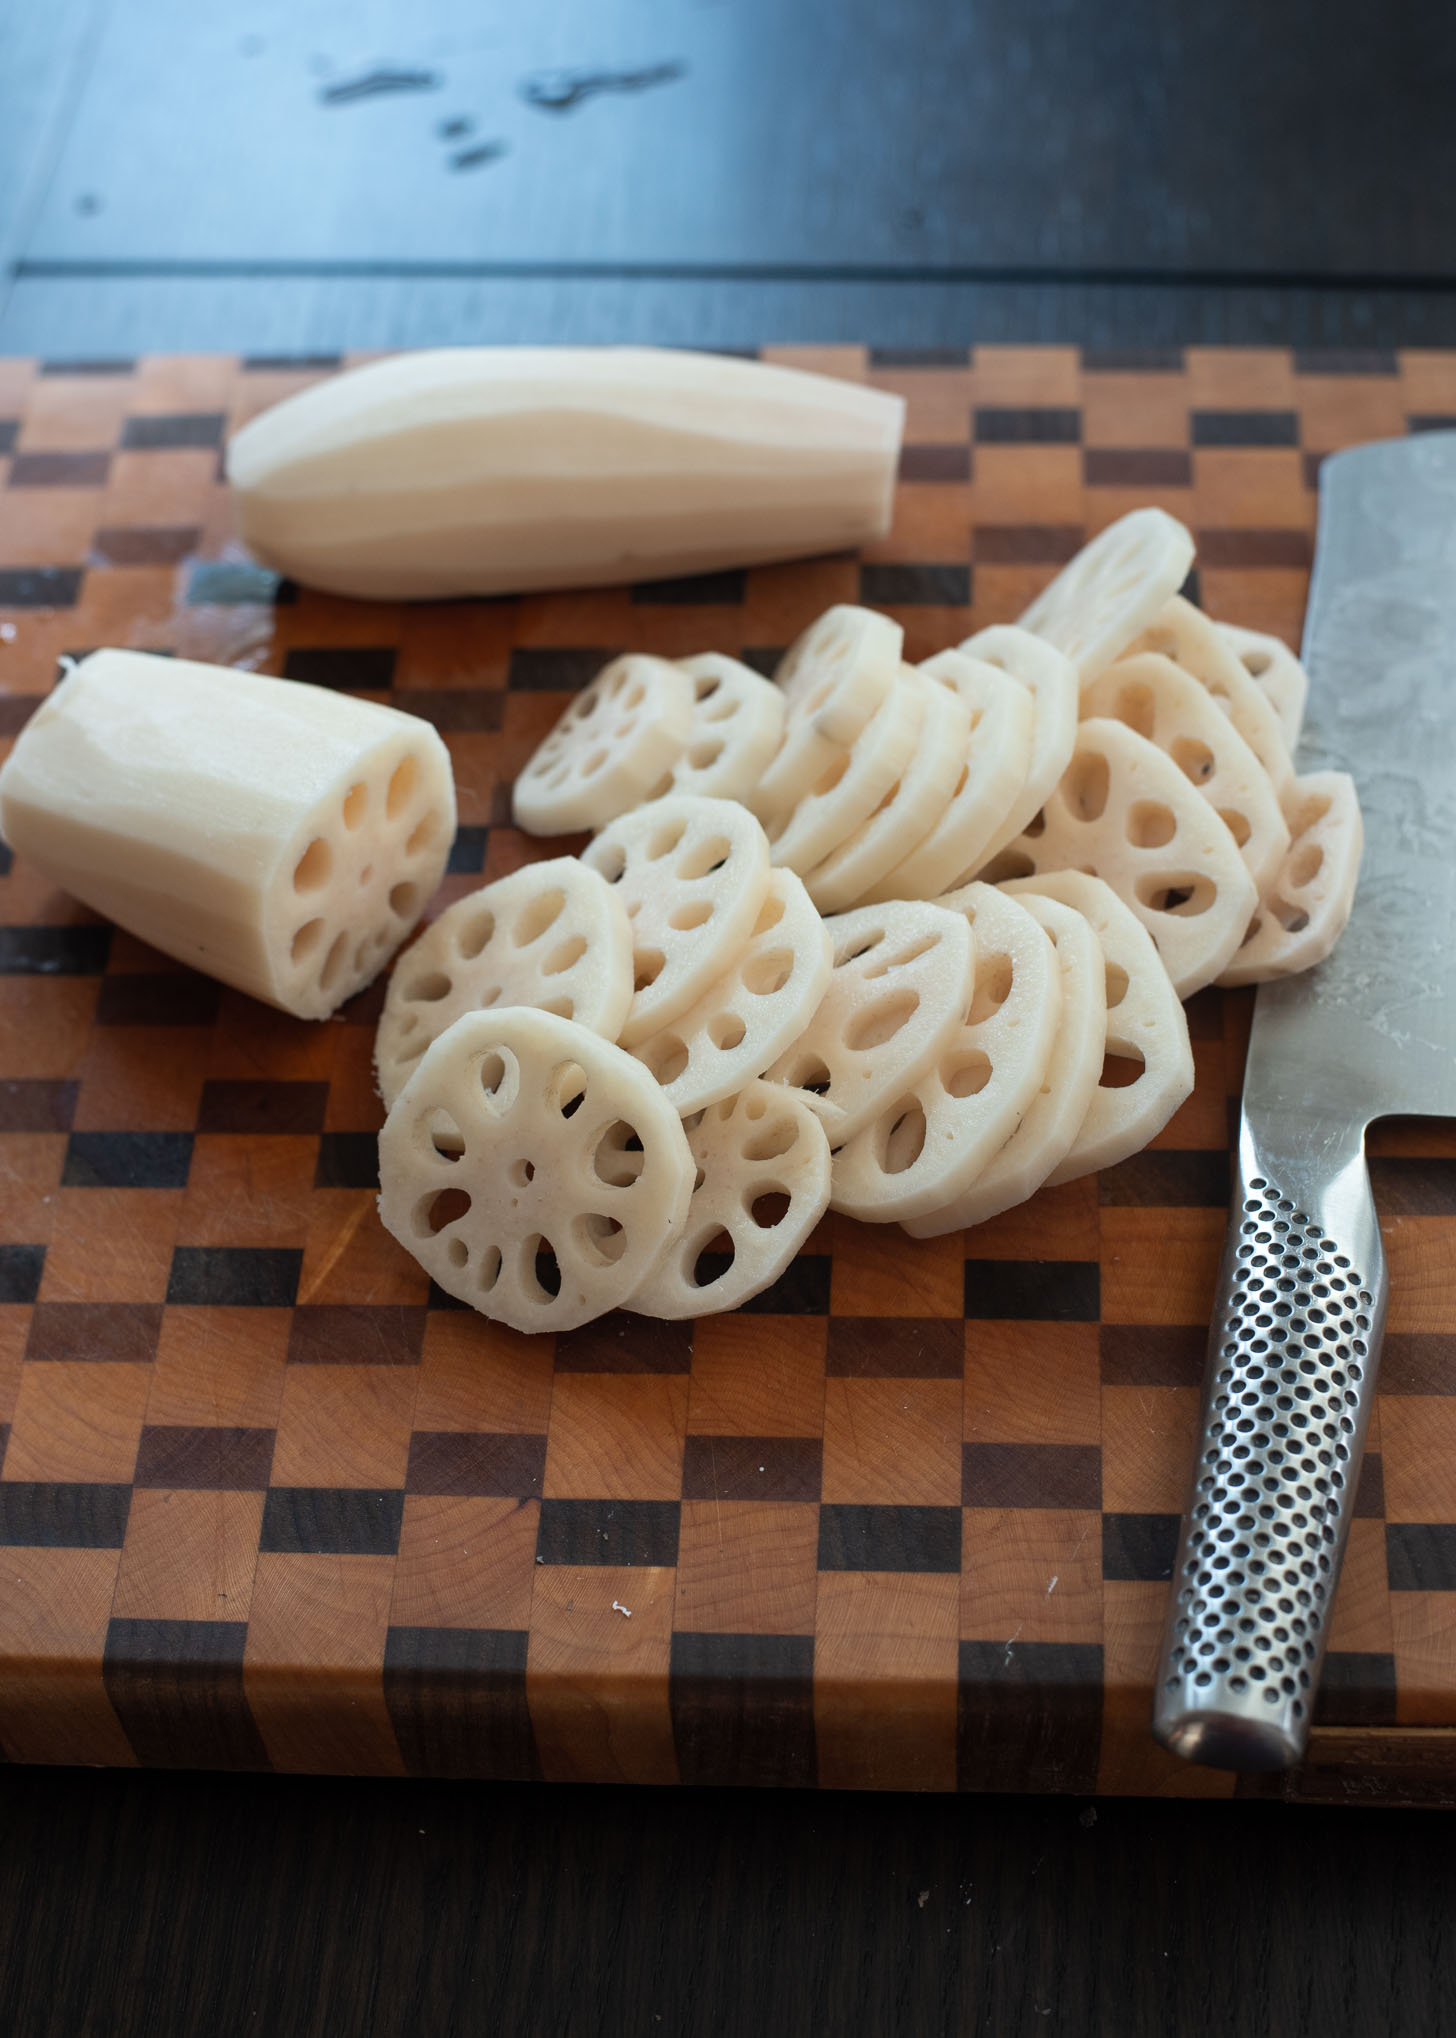 Peeled lotus roots are sliced thinly revealing its lacy interior.